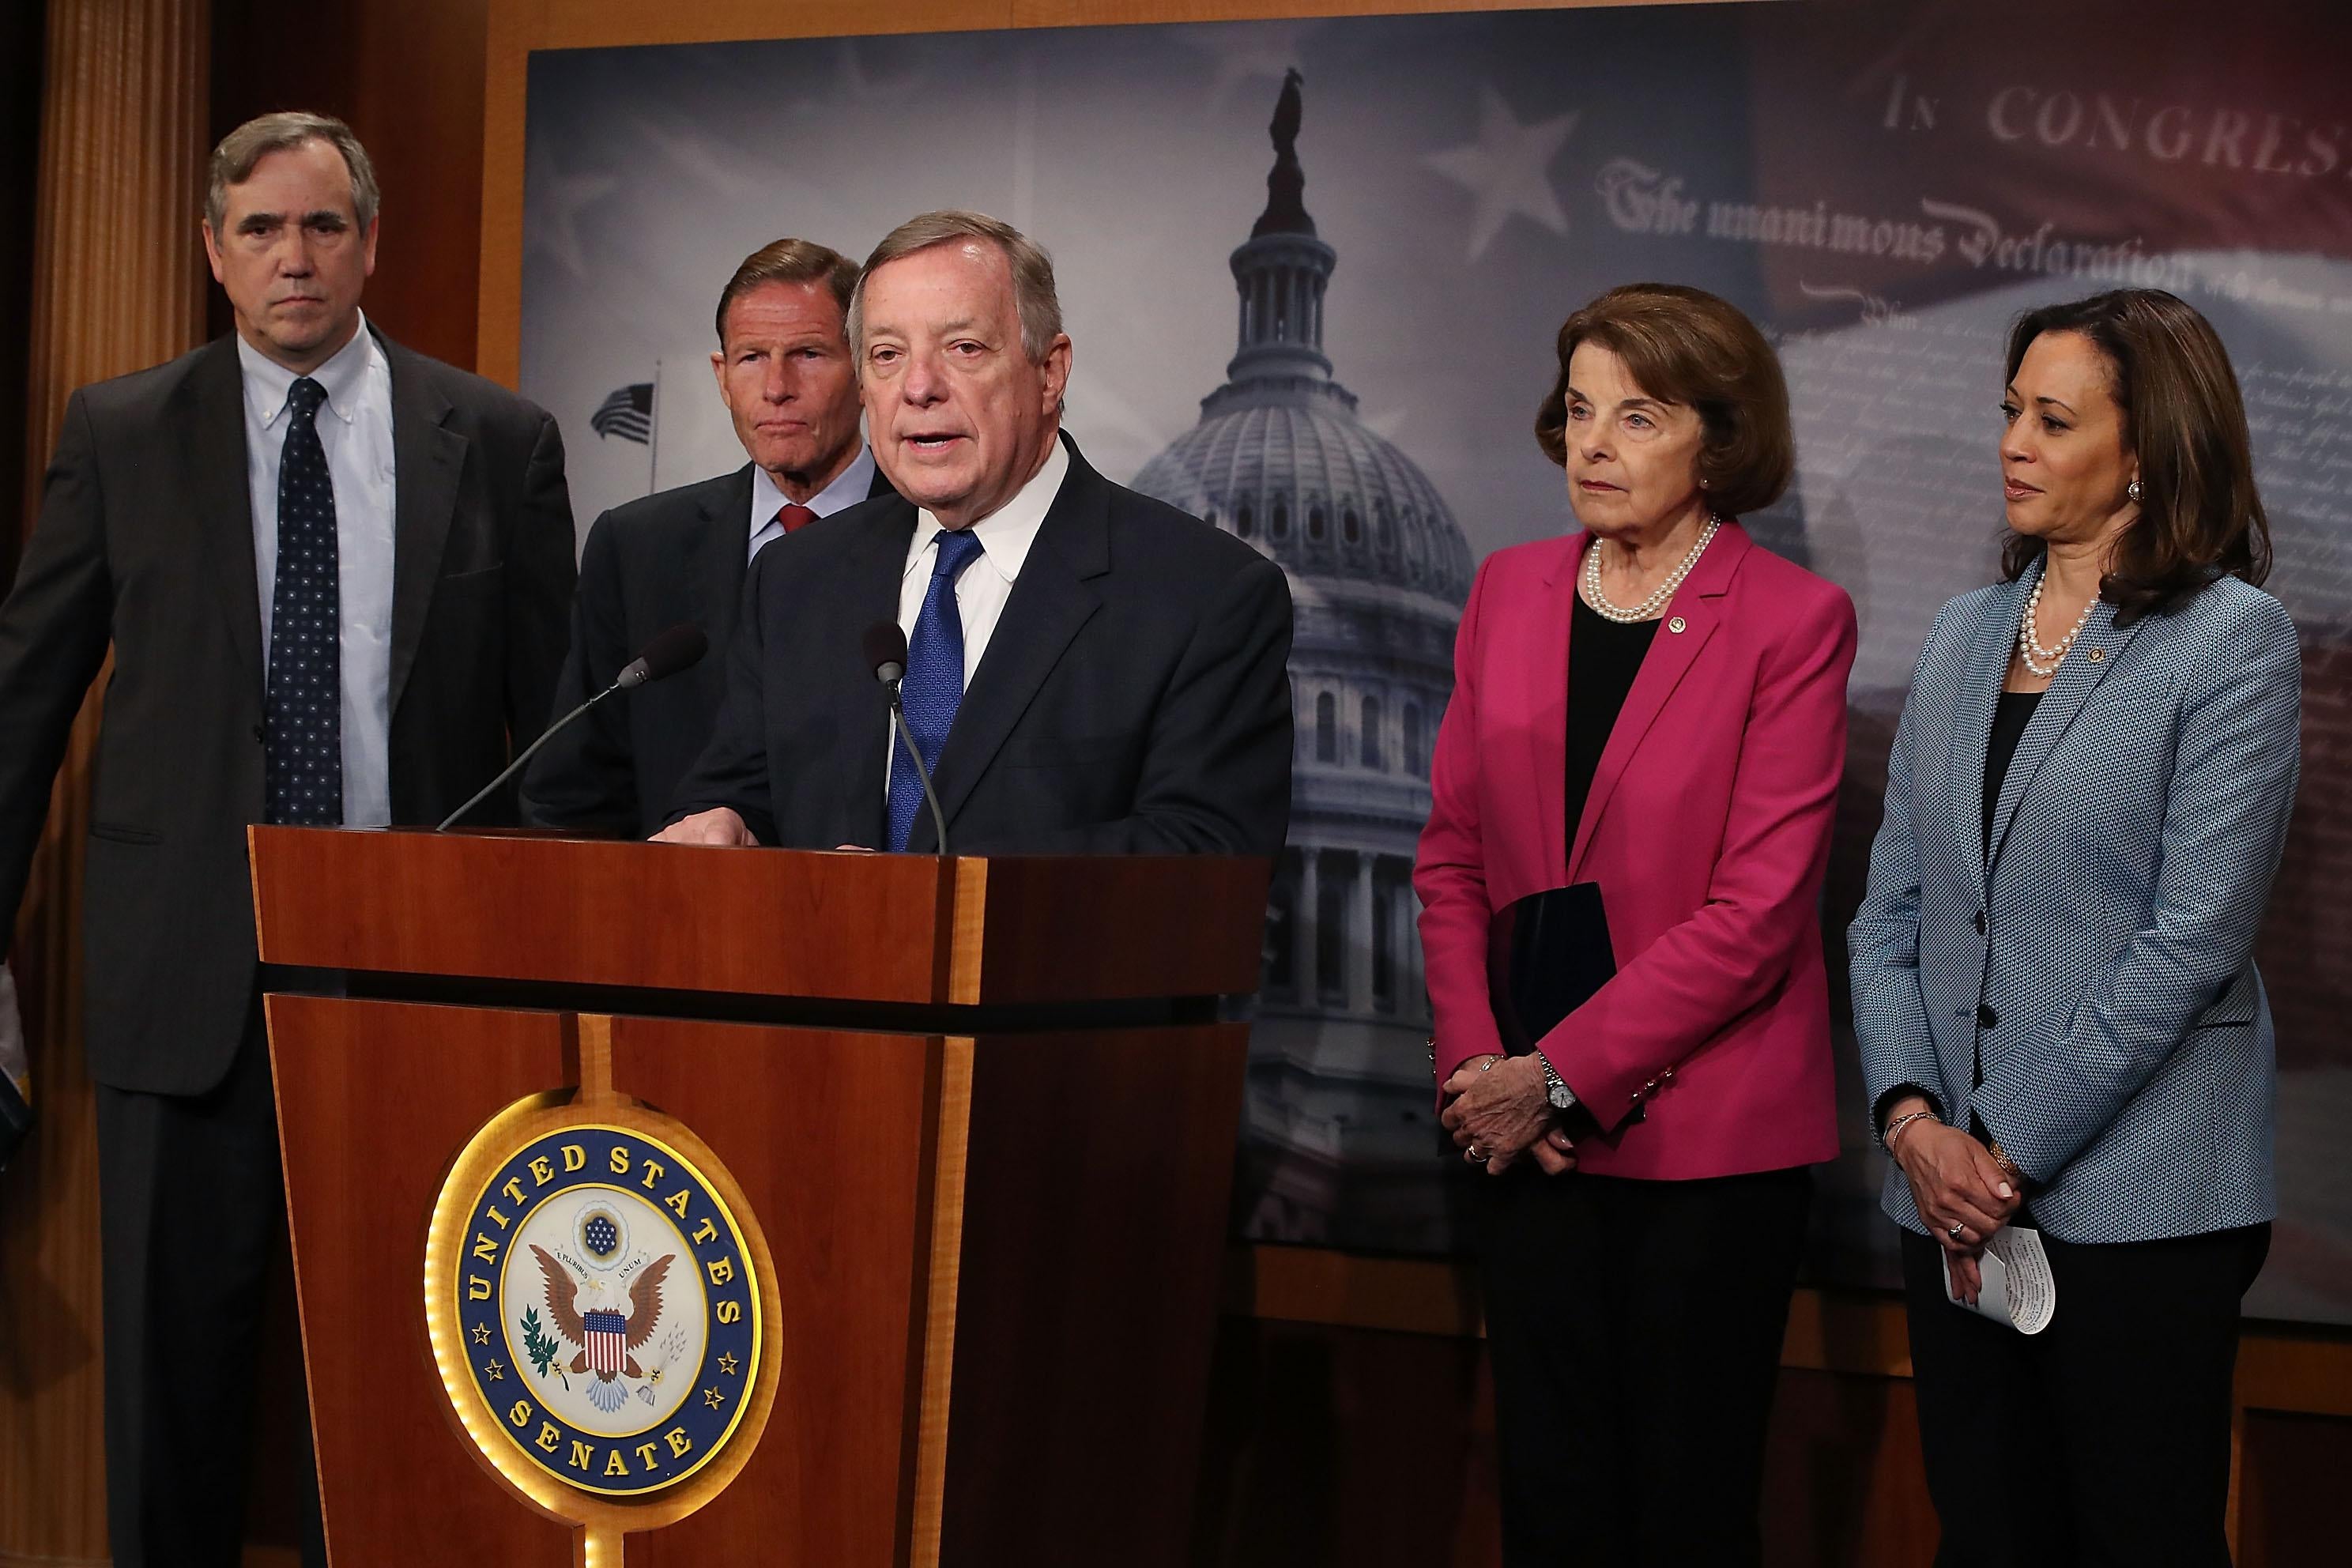 WASHINGTON, DC - JUNE 12:  Senate Minority Whip Dick Durbin, (D-IL) (C), speaks about the Keep Families Together Act, which aims to prevent the separation of immigrant children from their parents, on Capitol Hill June 12, 2018 in Washington, DC. Also pictured is (L-R), Sen. Jeff Merkley, (D-OR), Sen. Richard Blumenthal (D-CT), Senate Judiciary ranking member Dianne Feinstein, (D-CA) and Sen. Kamala Harris (D-CA)  (Photo by Mark Wilson/Getty Images)